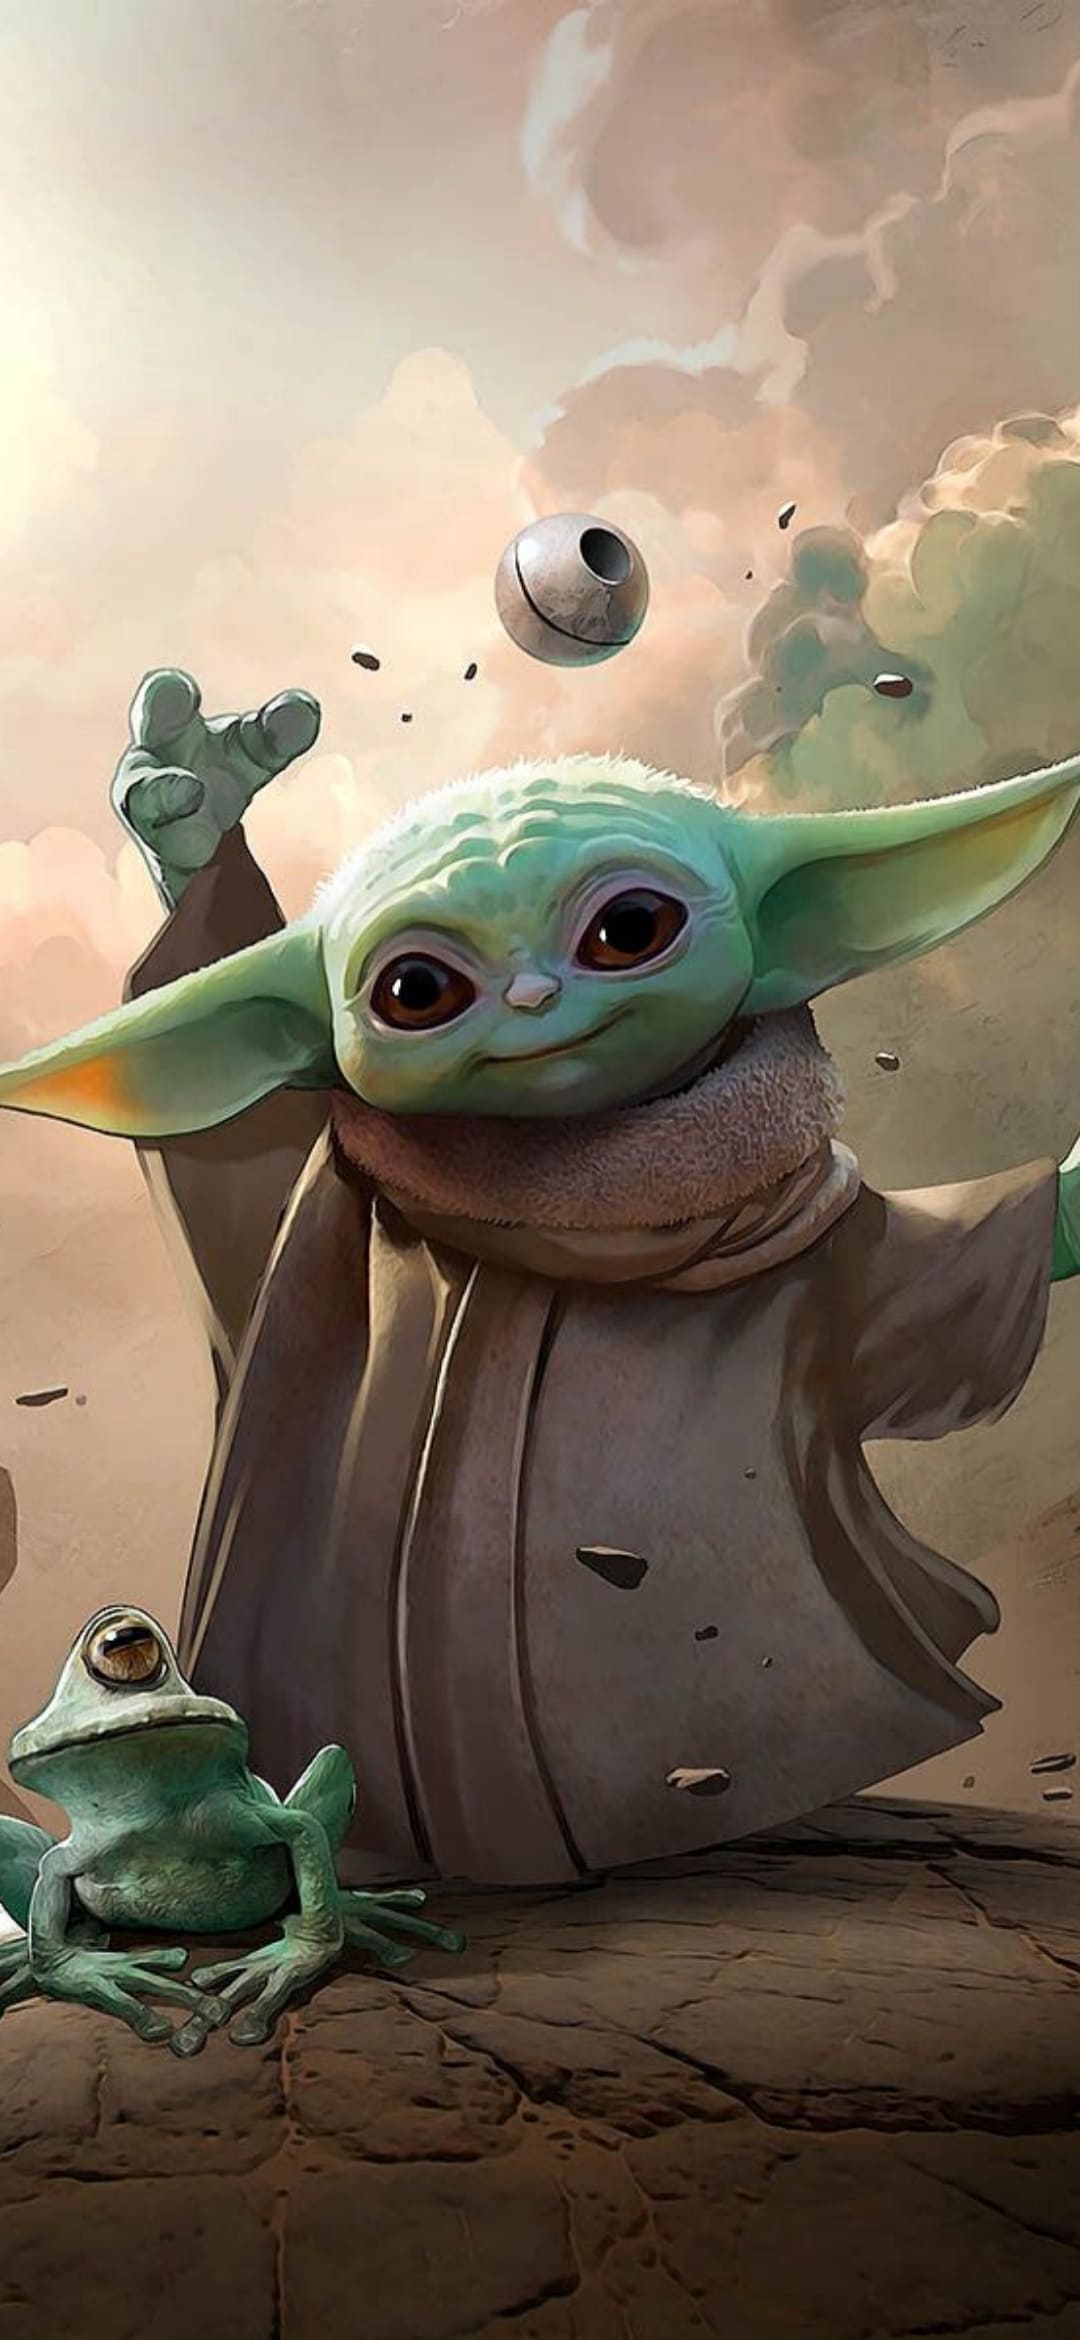 Top 65 Baby Yoda Wallpapers   Getty Wallpapers